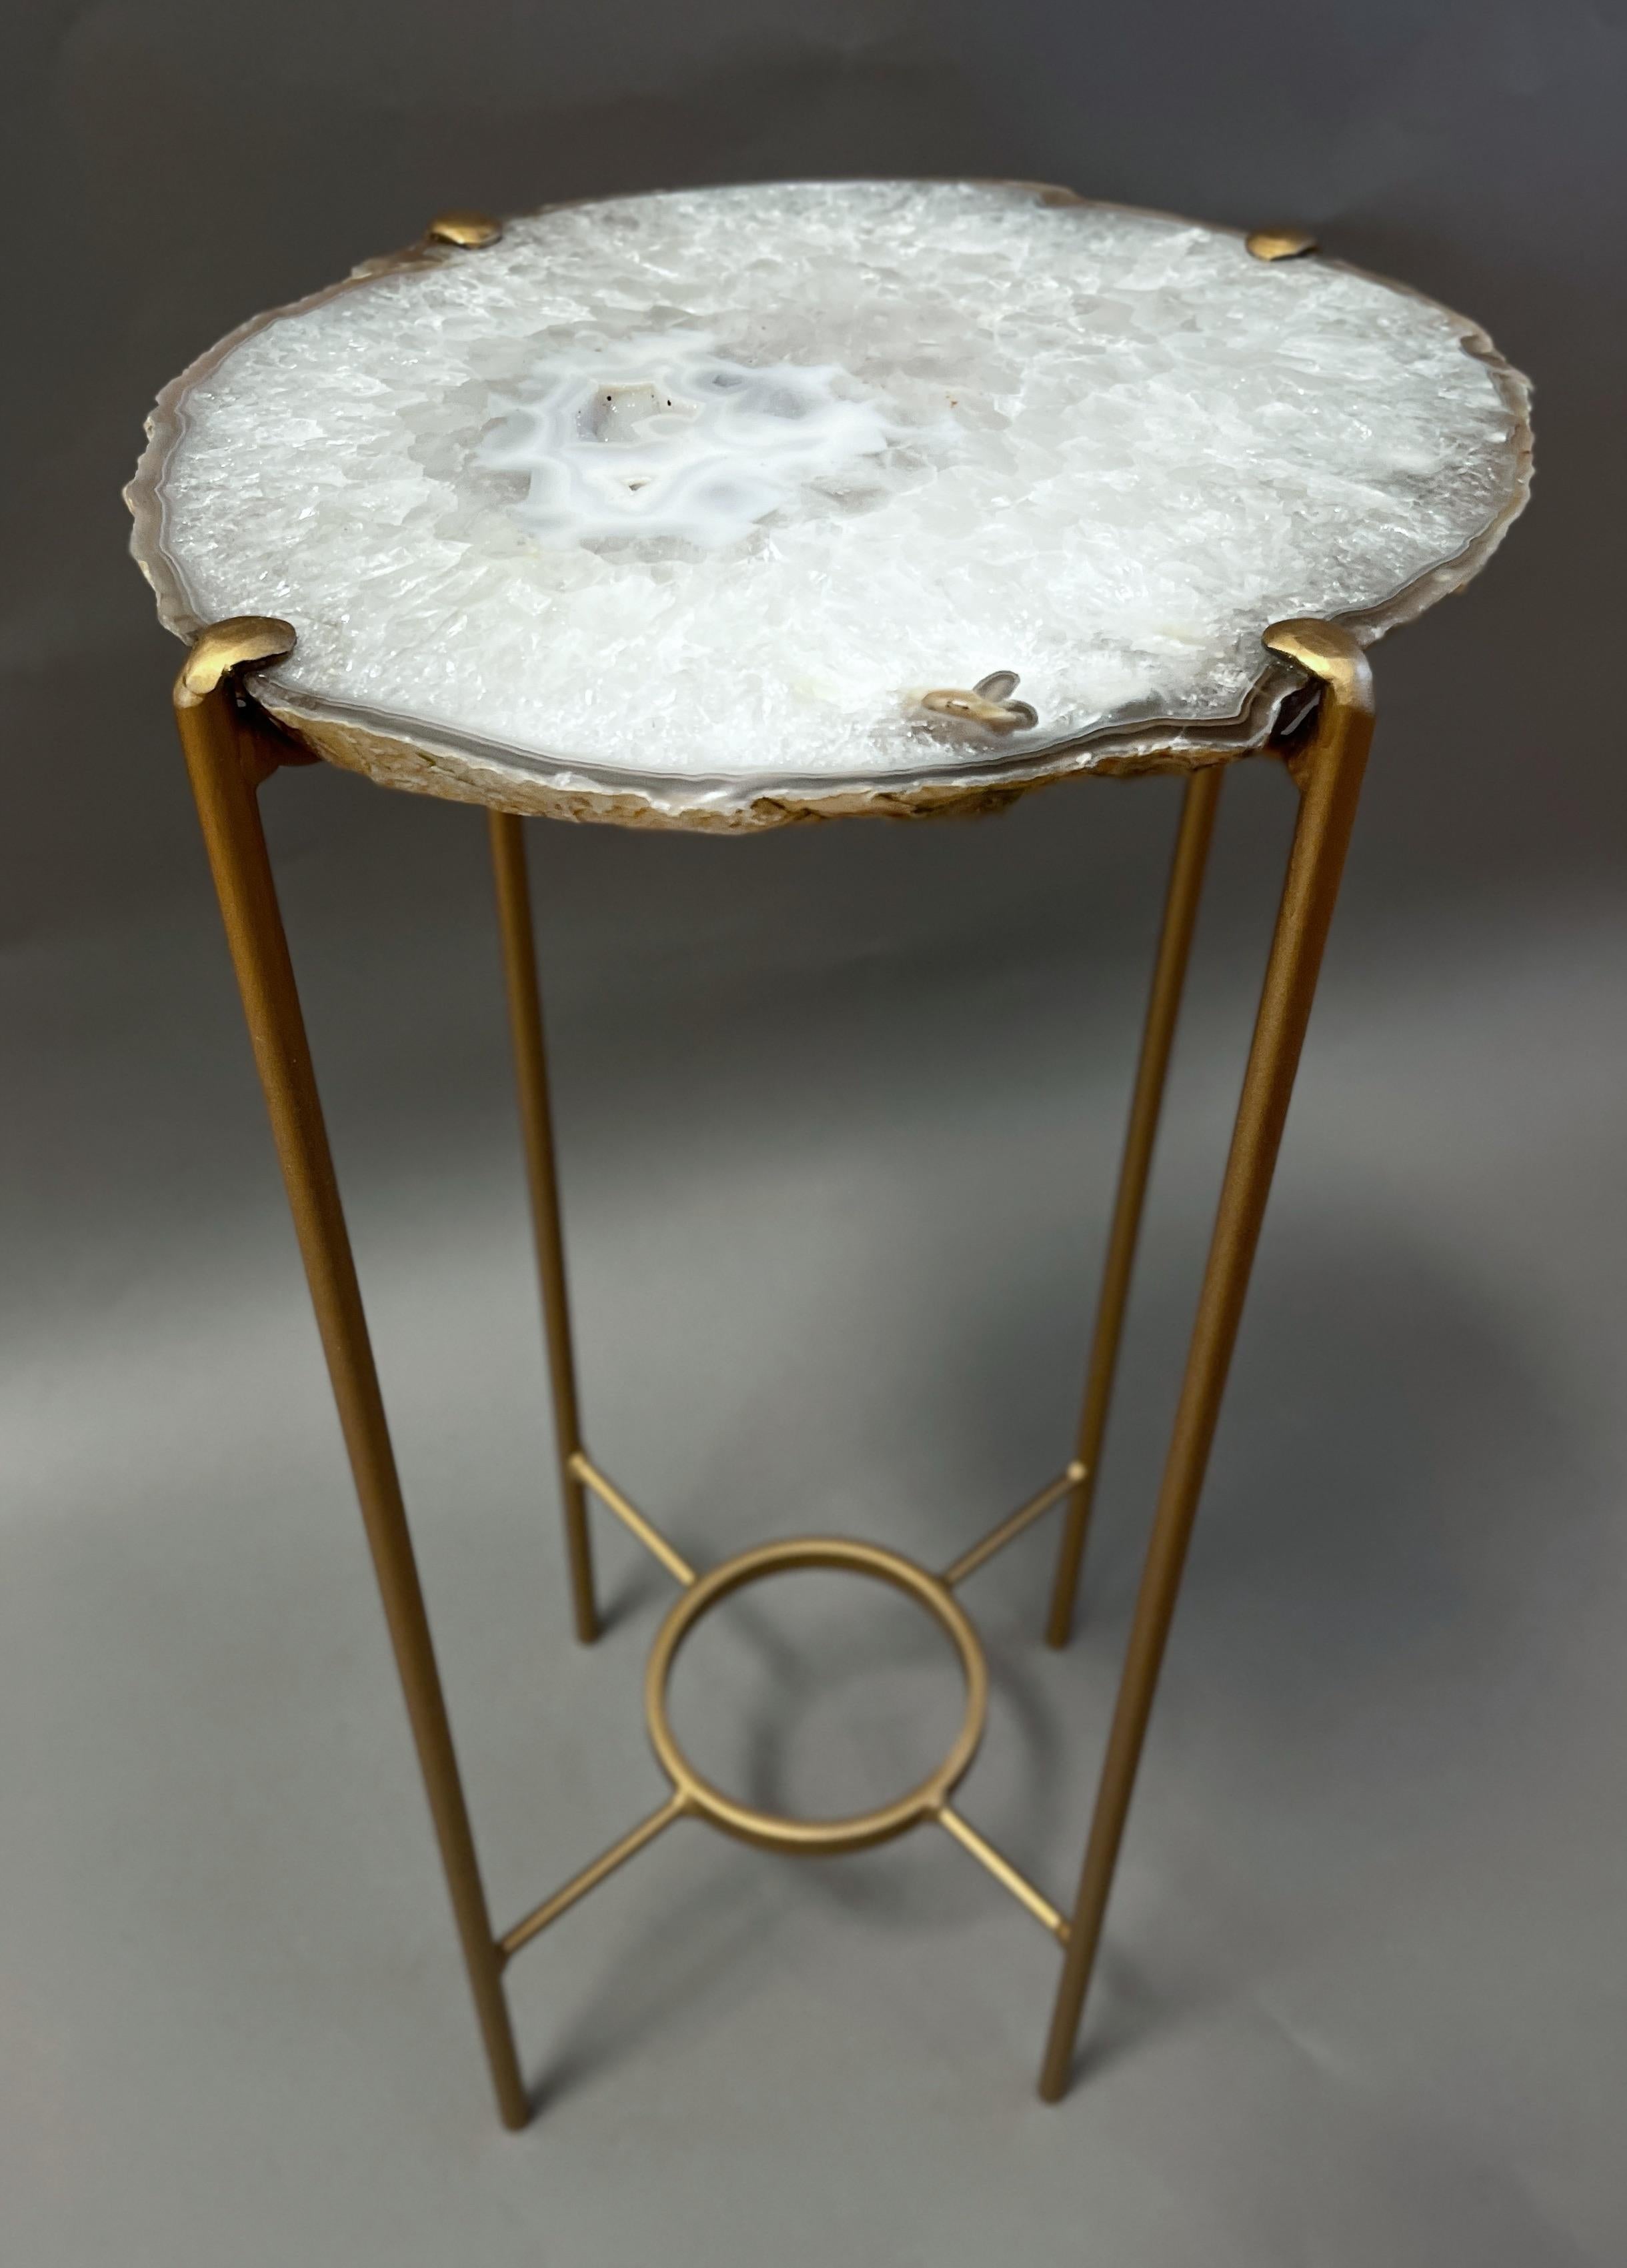 North American Unusual Modern Handcrafted Geode Table